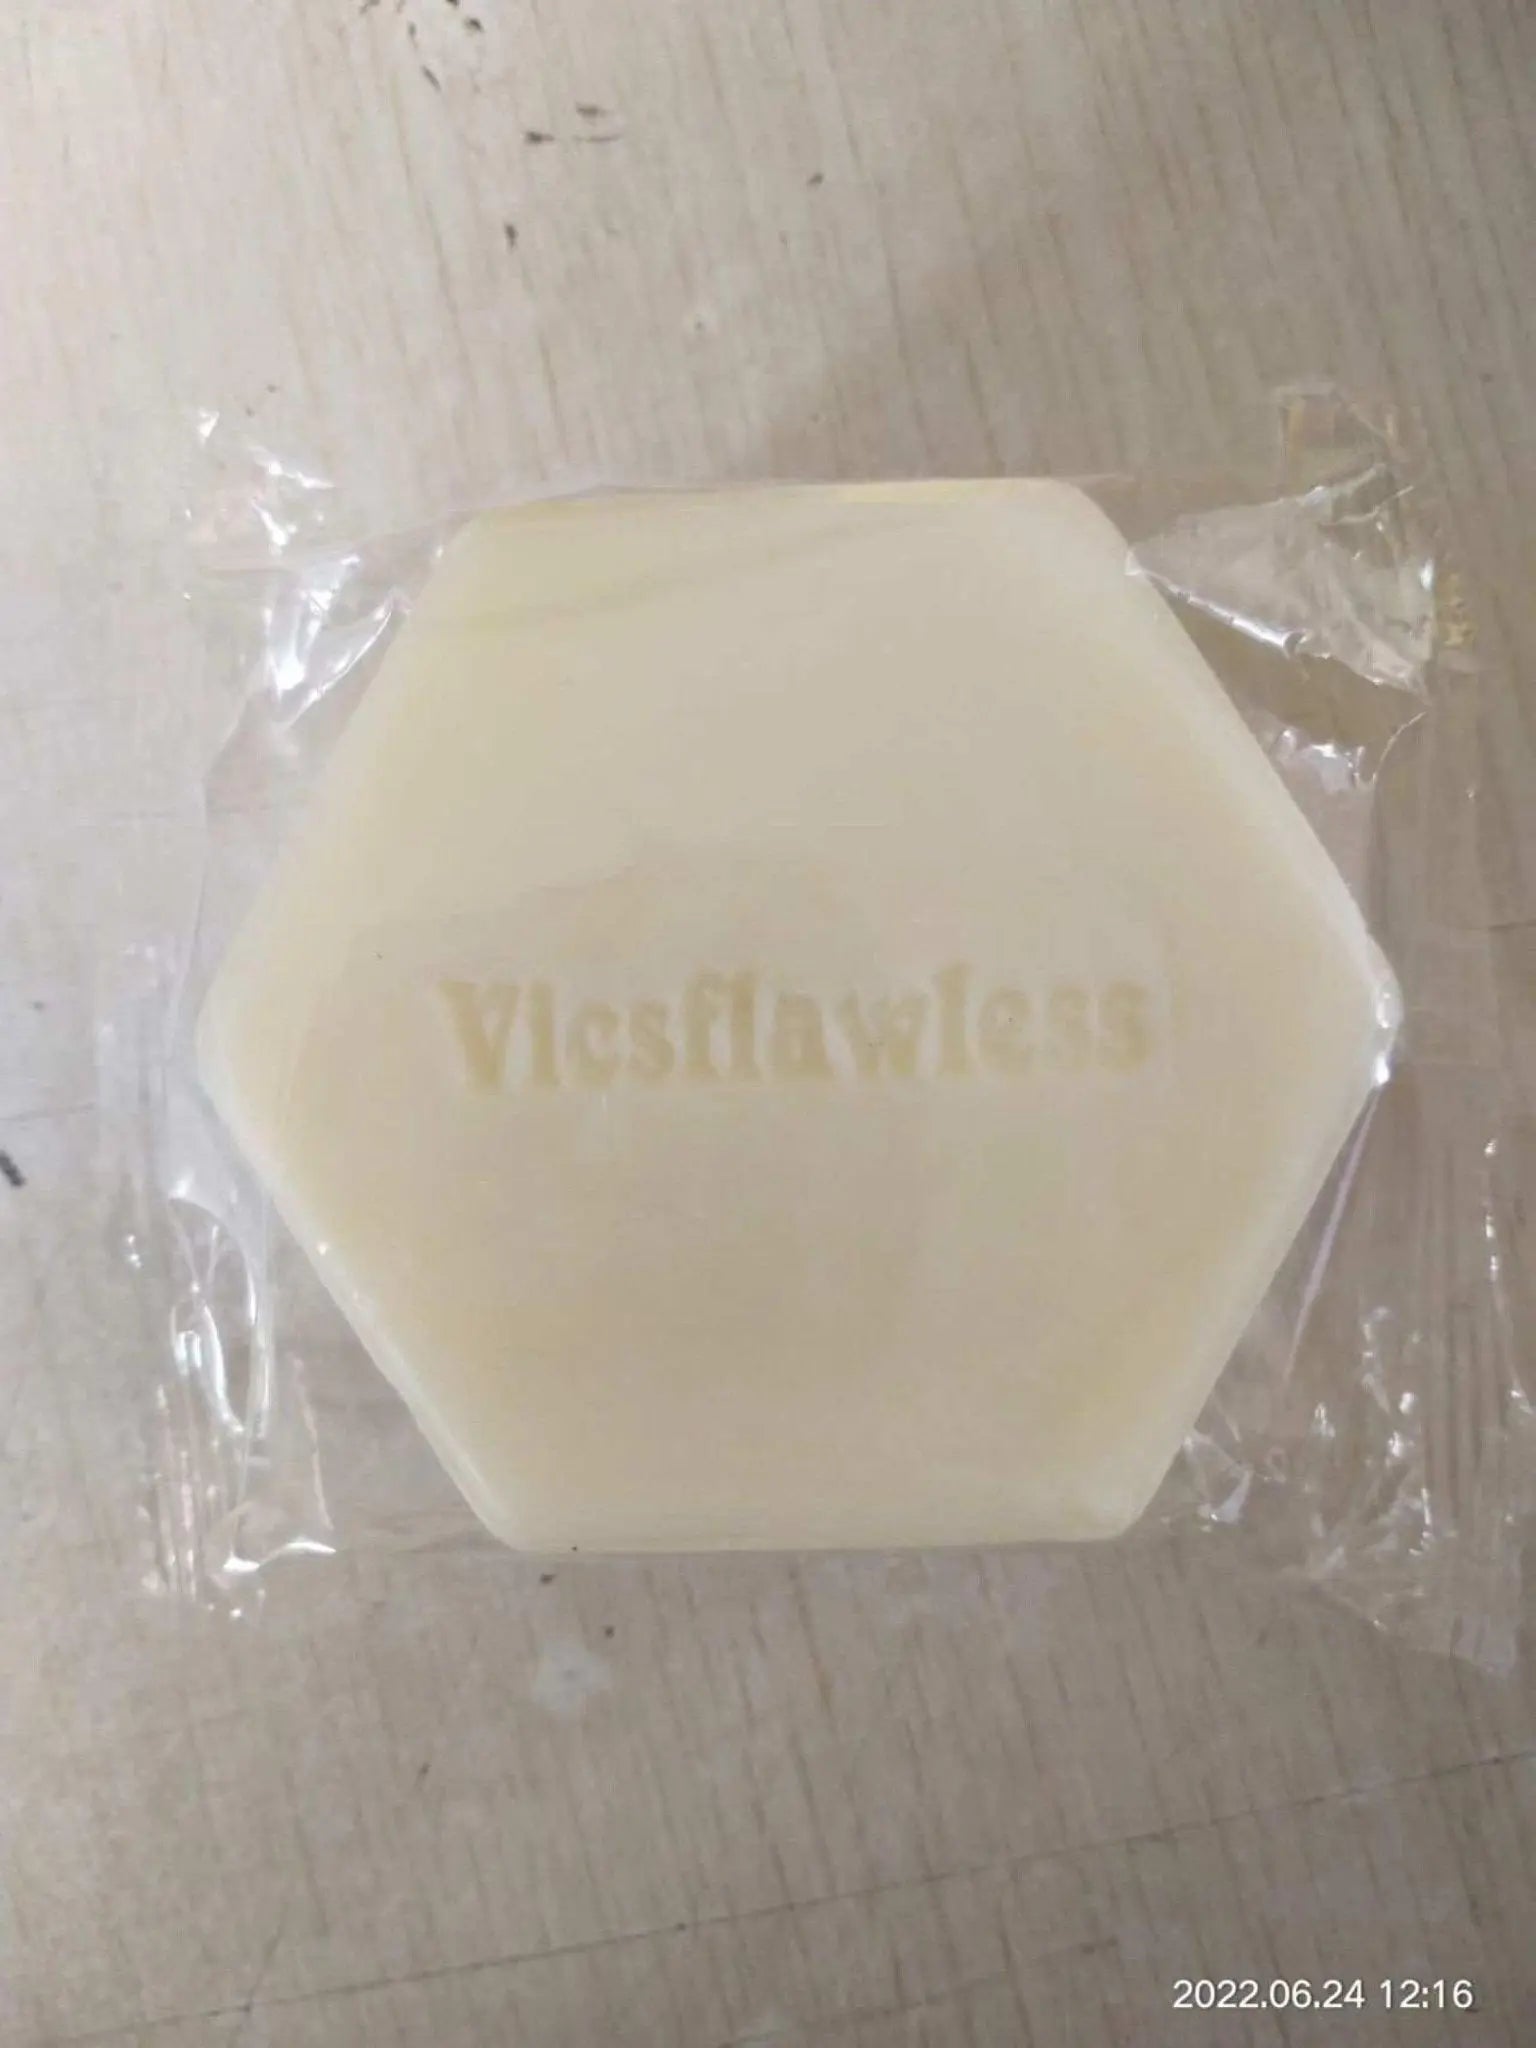 Radiance (Brightening Face Soap) - Vicsflawless